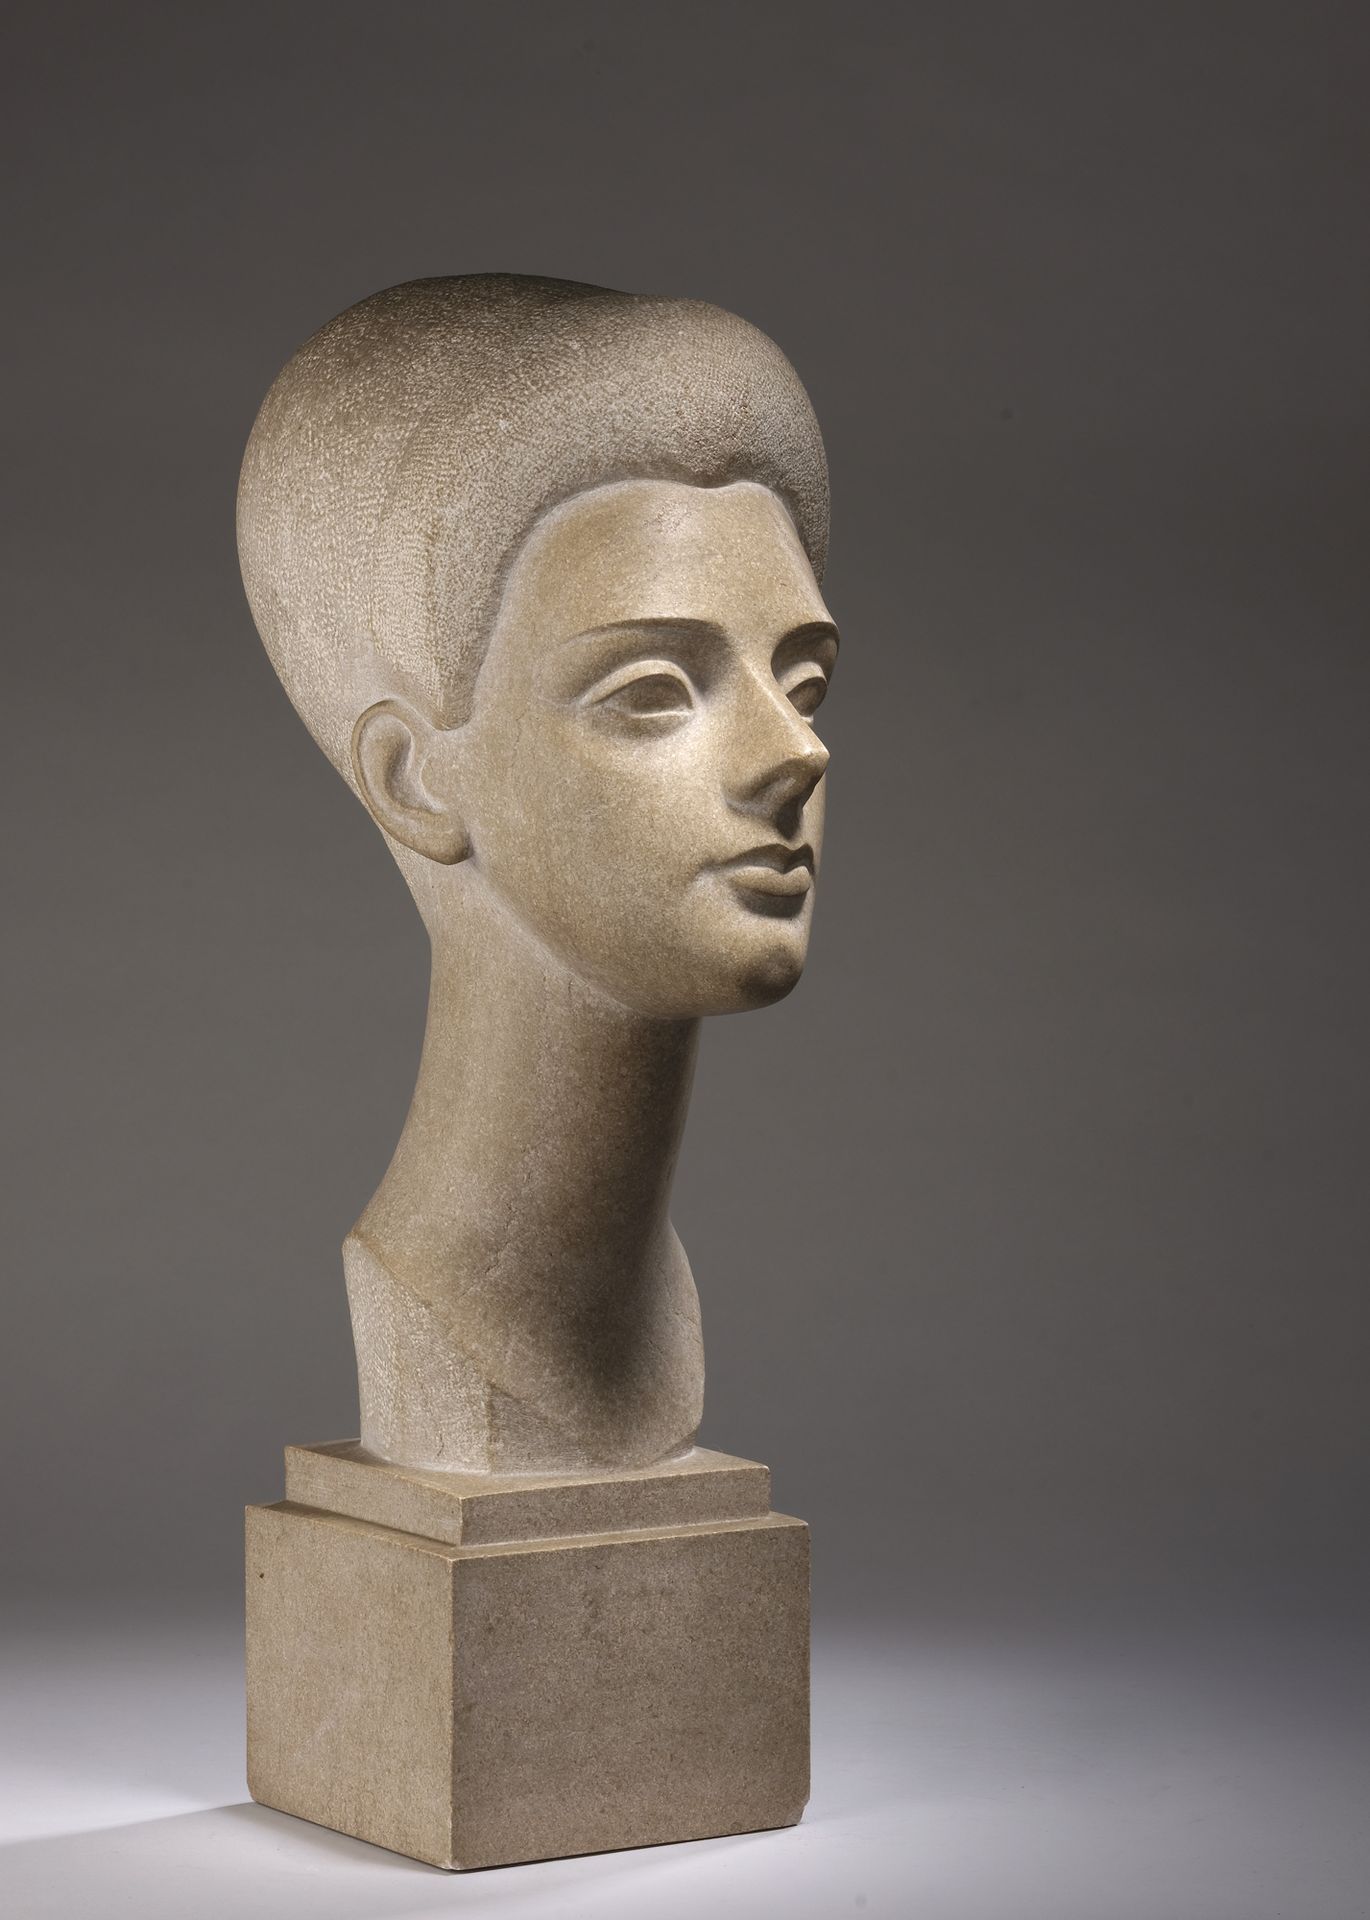 Null Lucien LAFAYE (1896-1975)

Bust of a young girl

About 1950.

Burgundy ston&hellip;